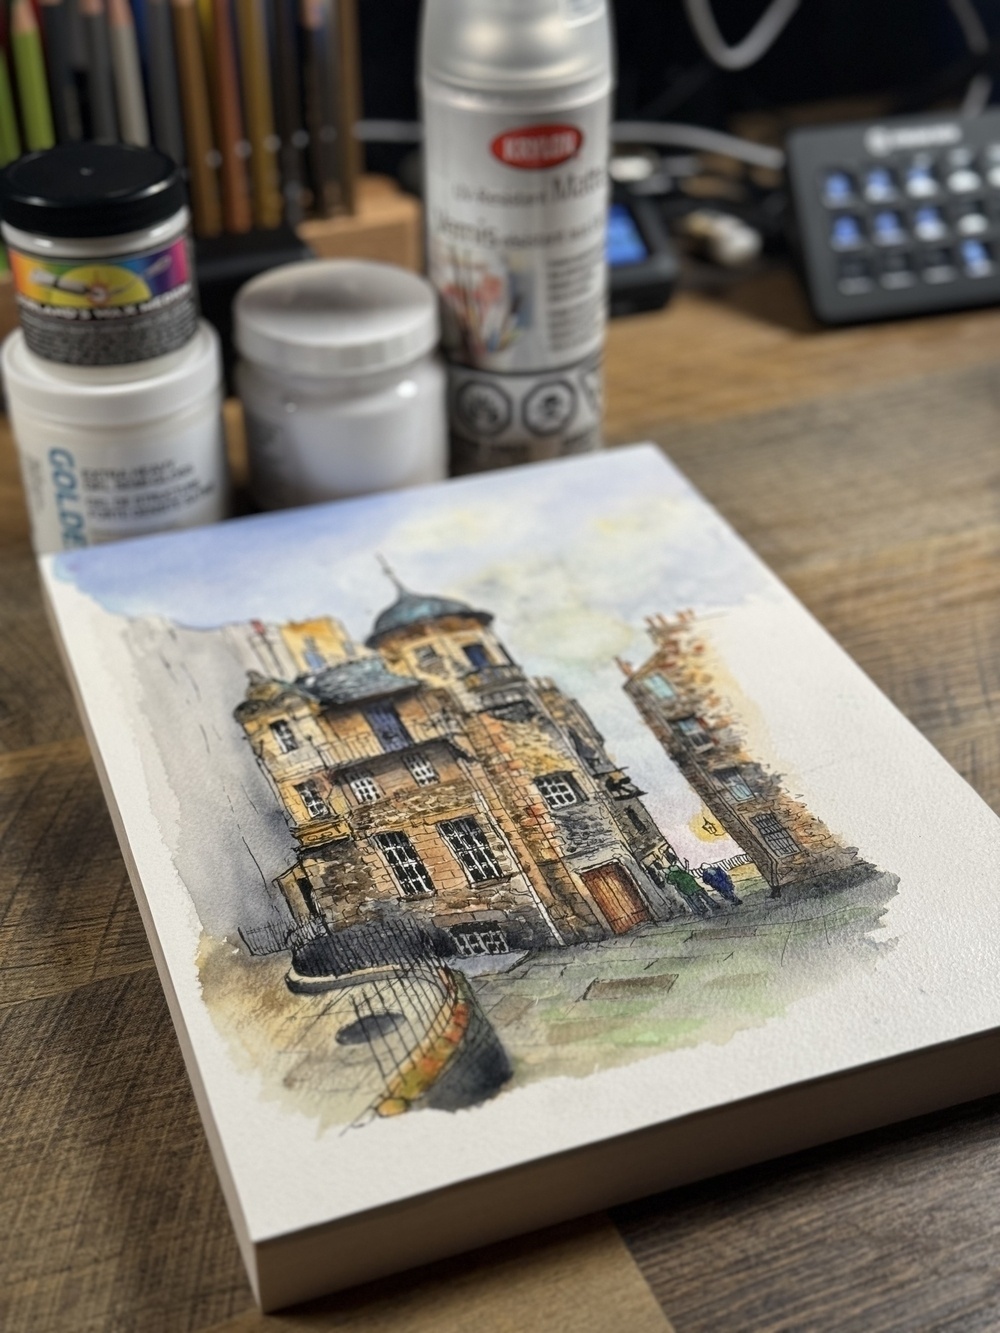 A watercolor painting of a historic building sits on a wooden table surrounded by art supplies like paint bottles and spray cans.